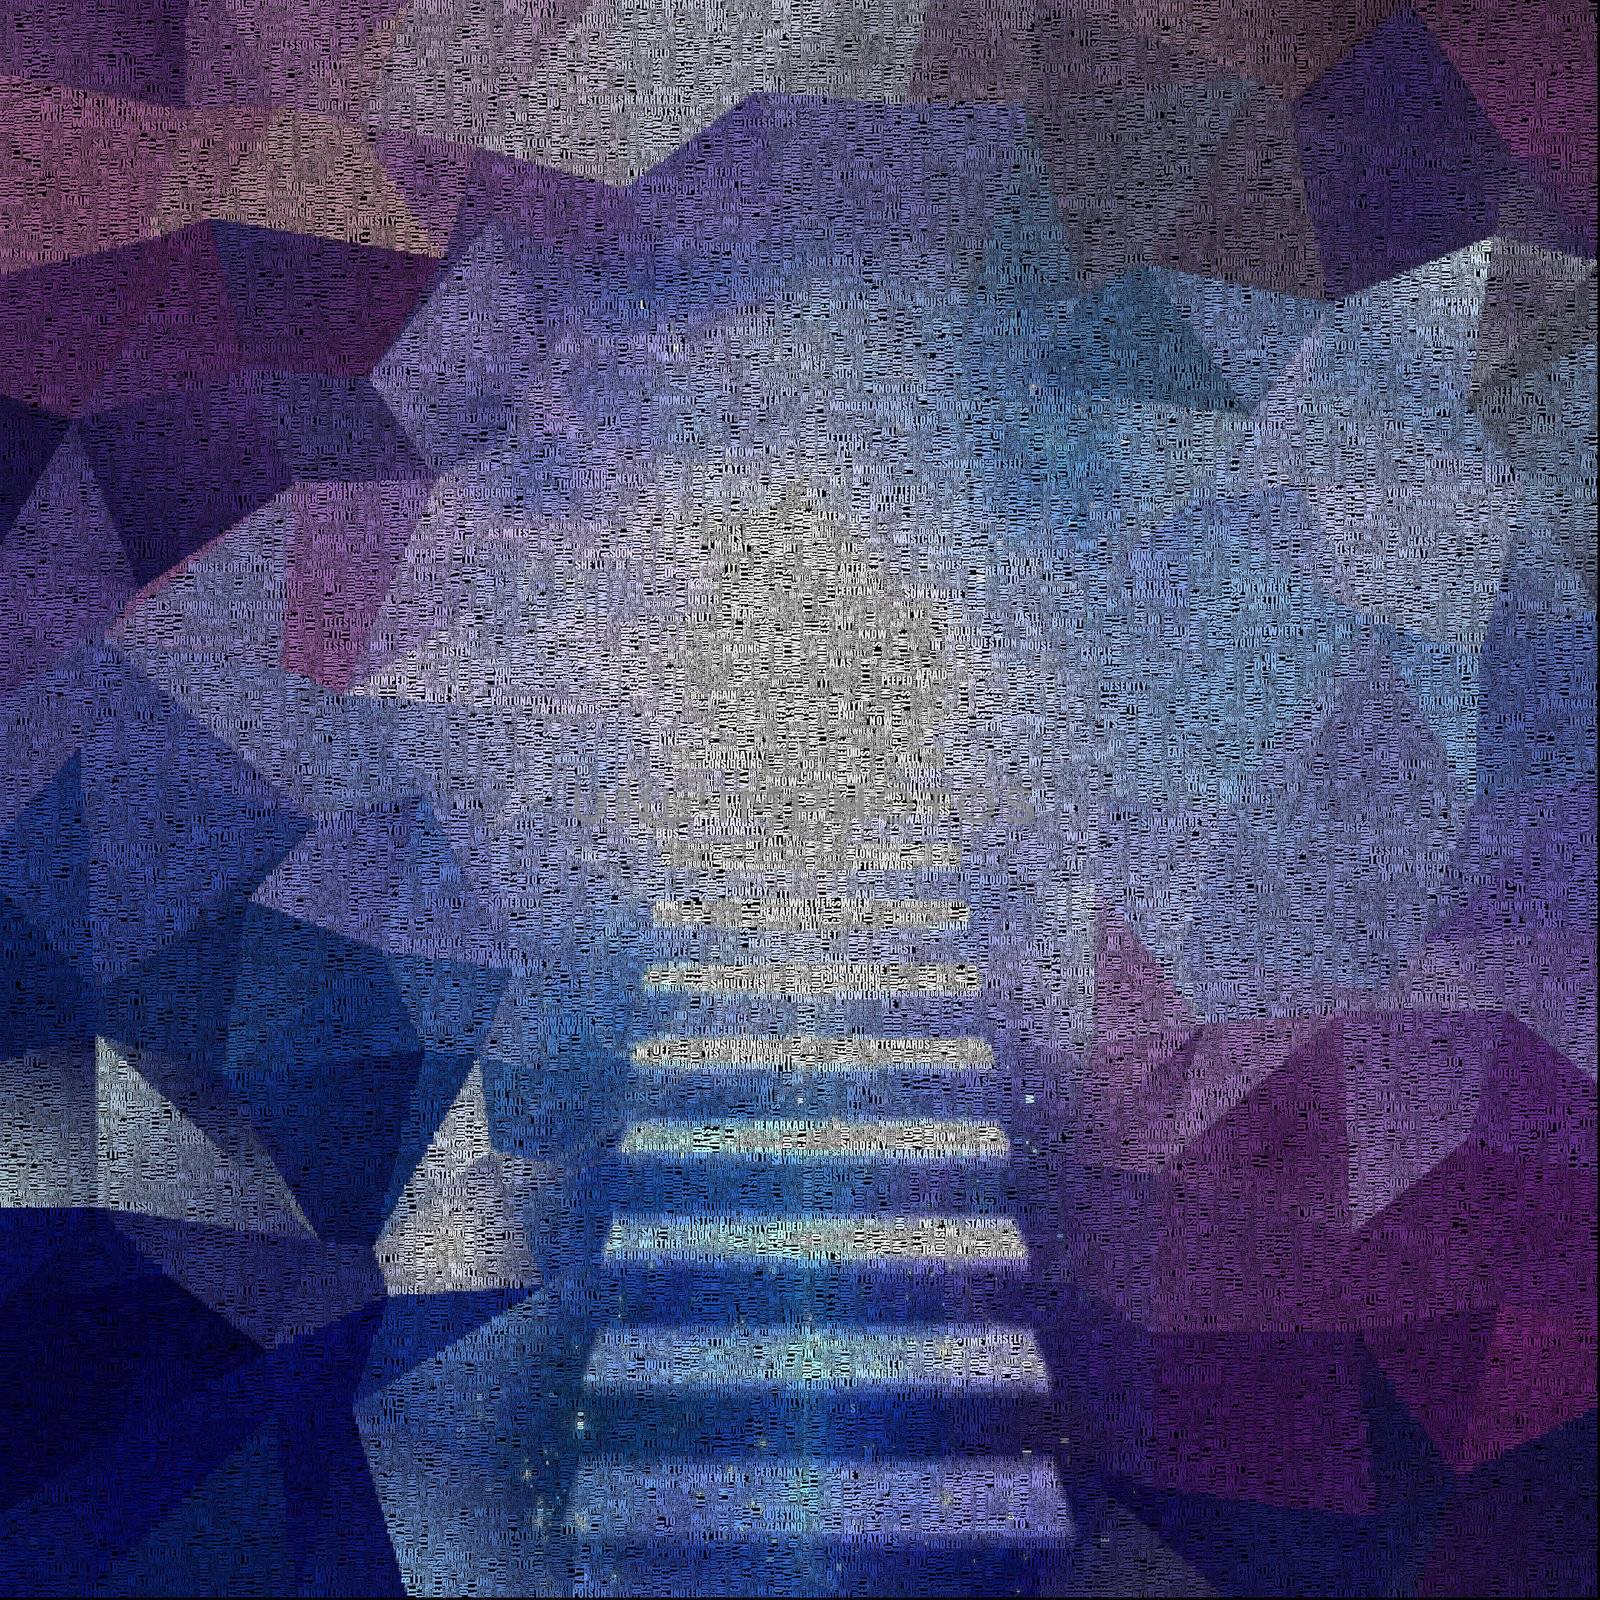 Abstract geometric shapes. Stairway and light. Image composed entirely of words